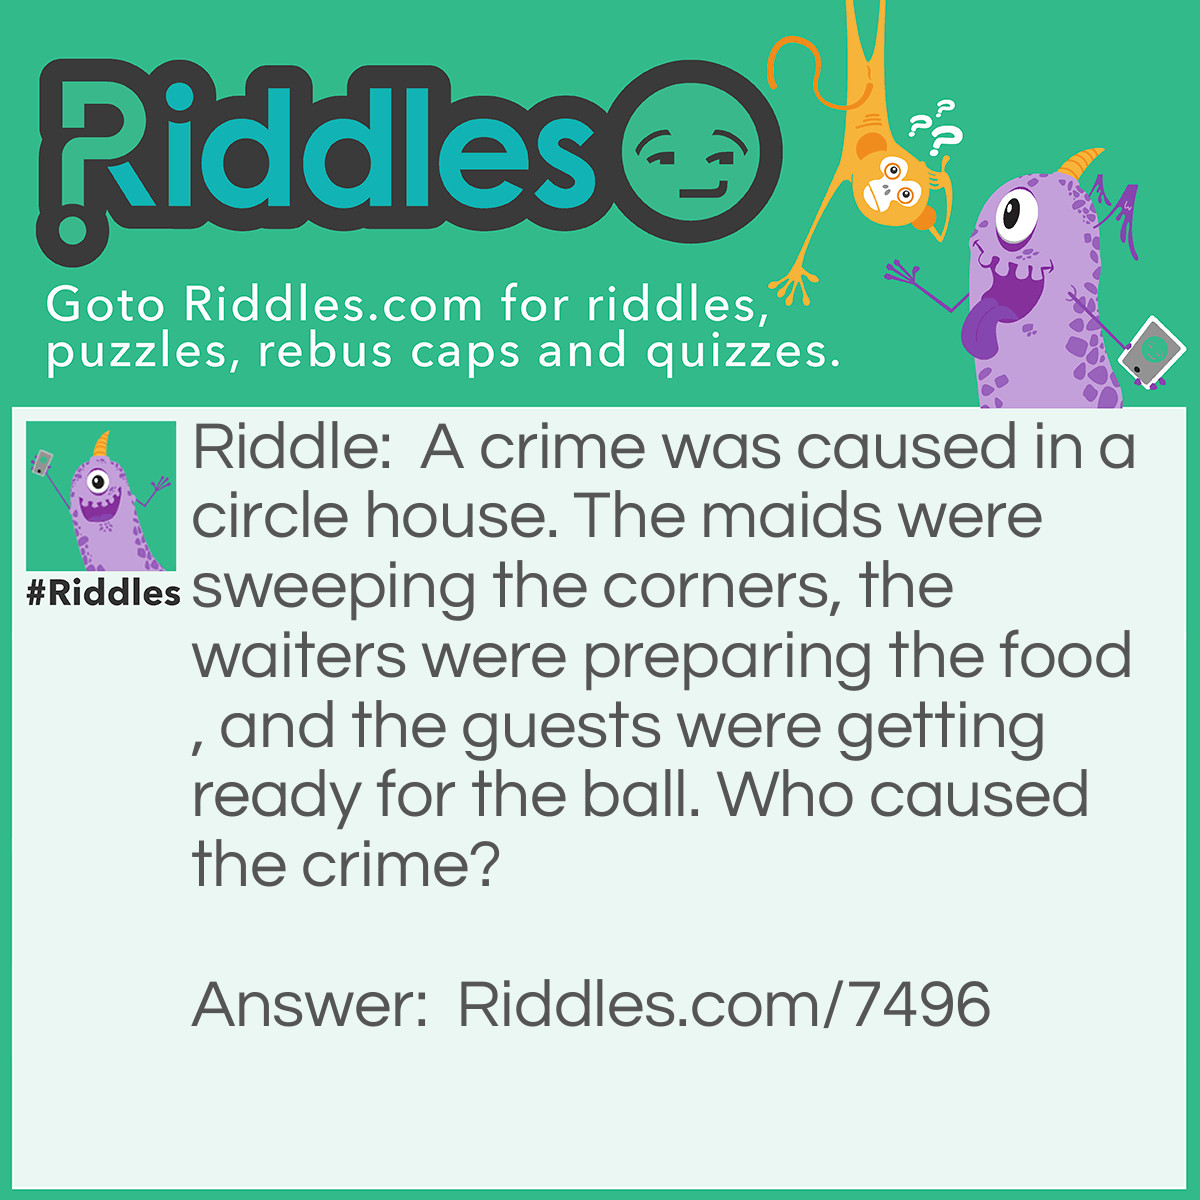 Riddle: A crime was caused in a circle house. The maids were sweeping the corners, the waiters were preparing the food, and the guests were getting ready for the ball. Who caused the crime? Answer: The maids. There are no corners in a circle house!